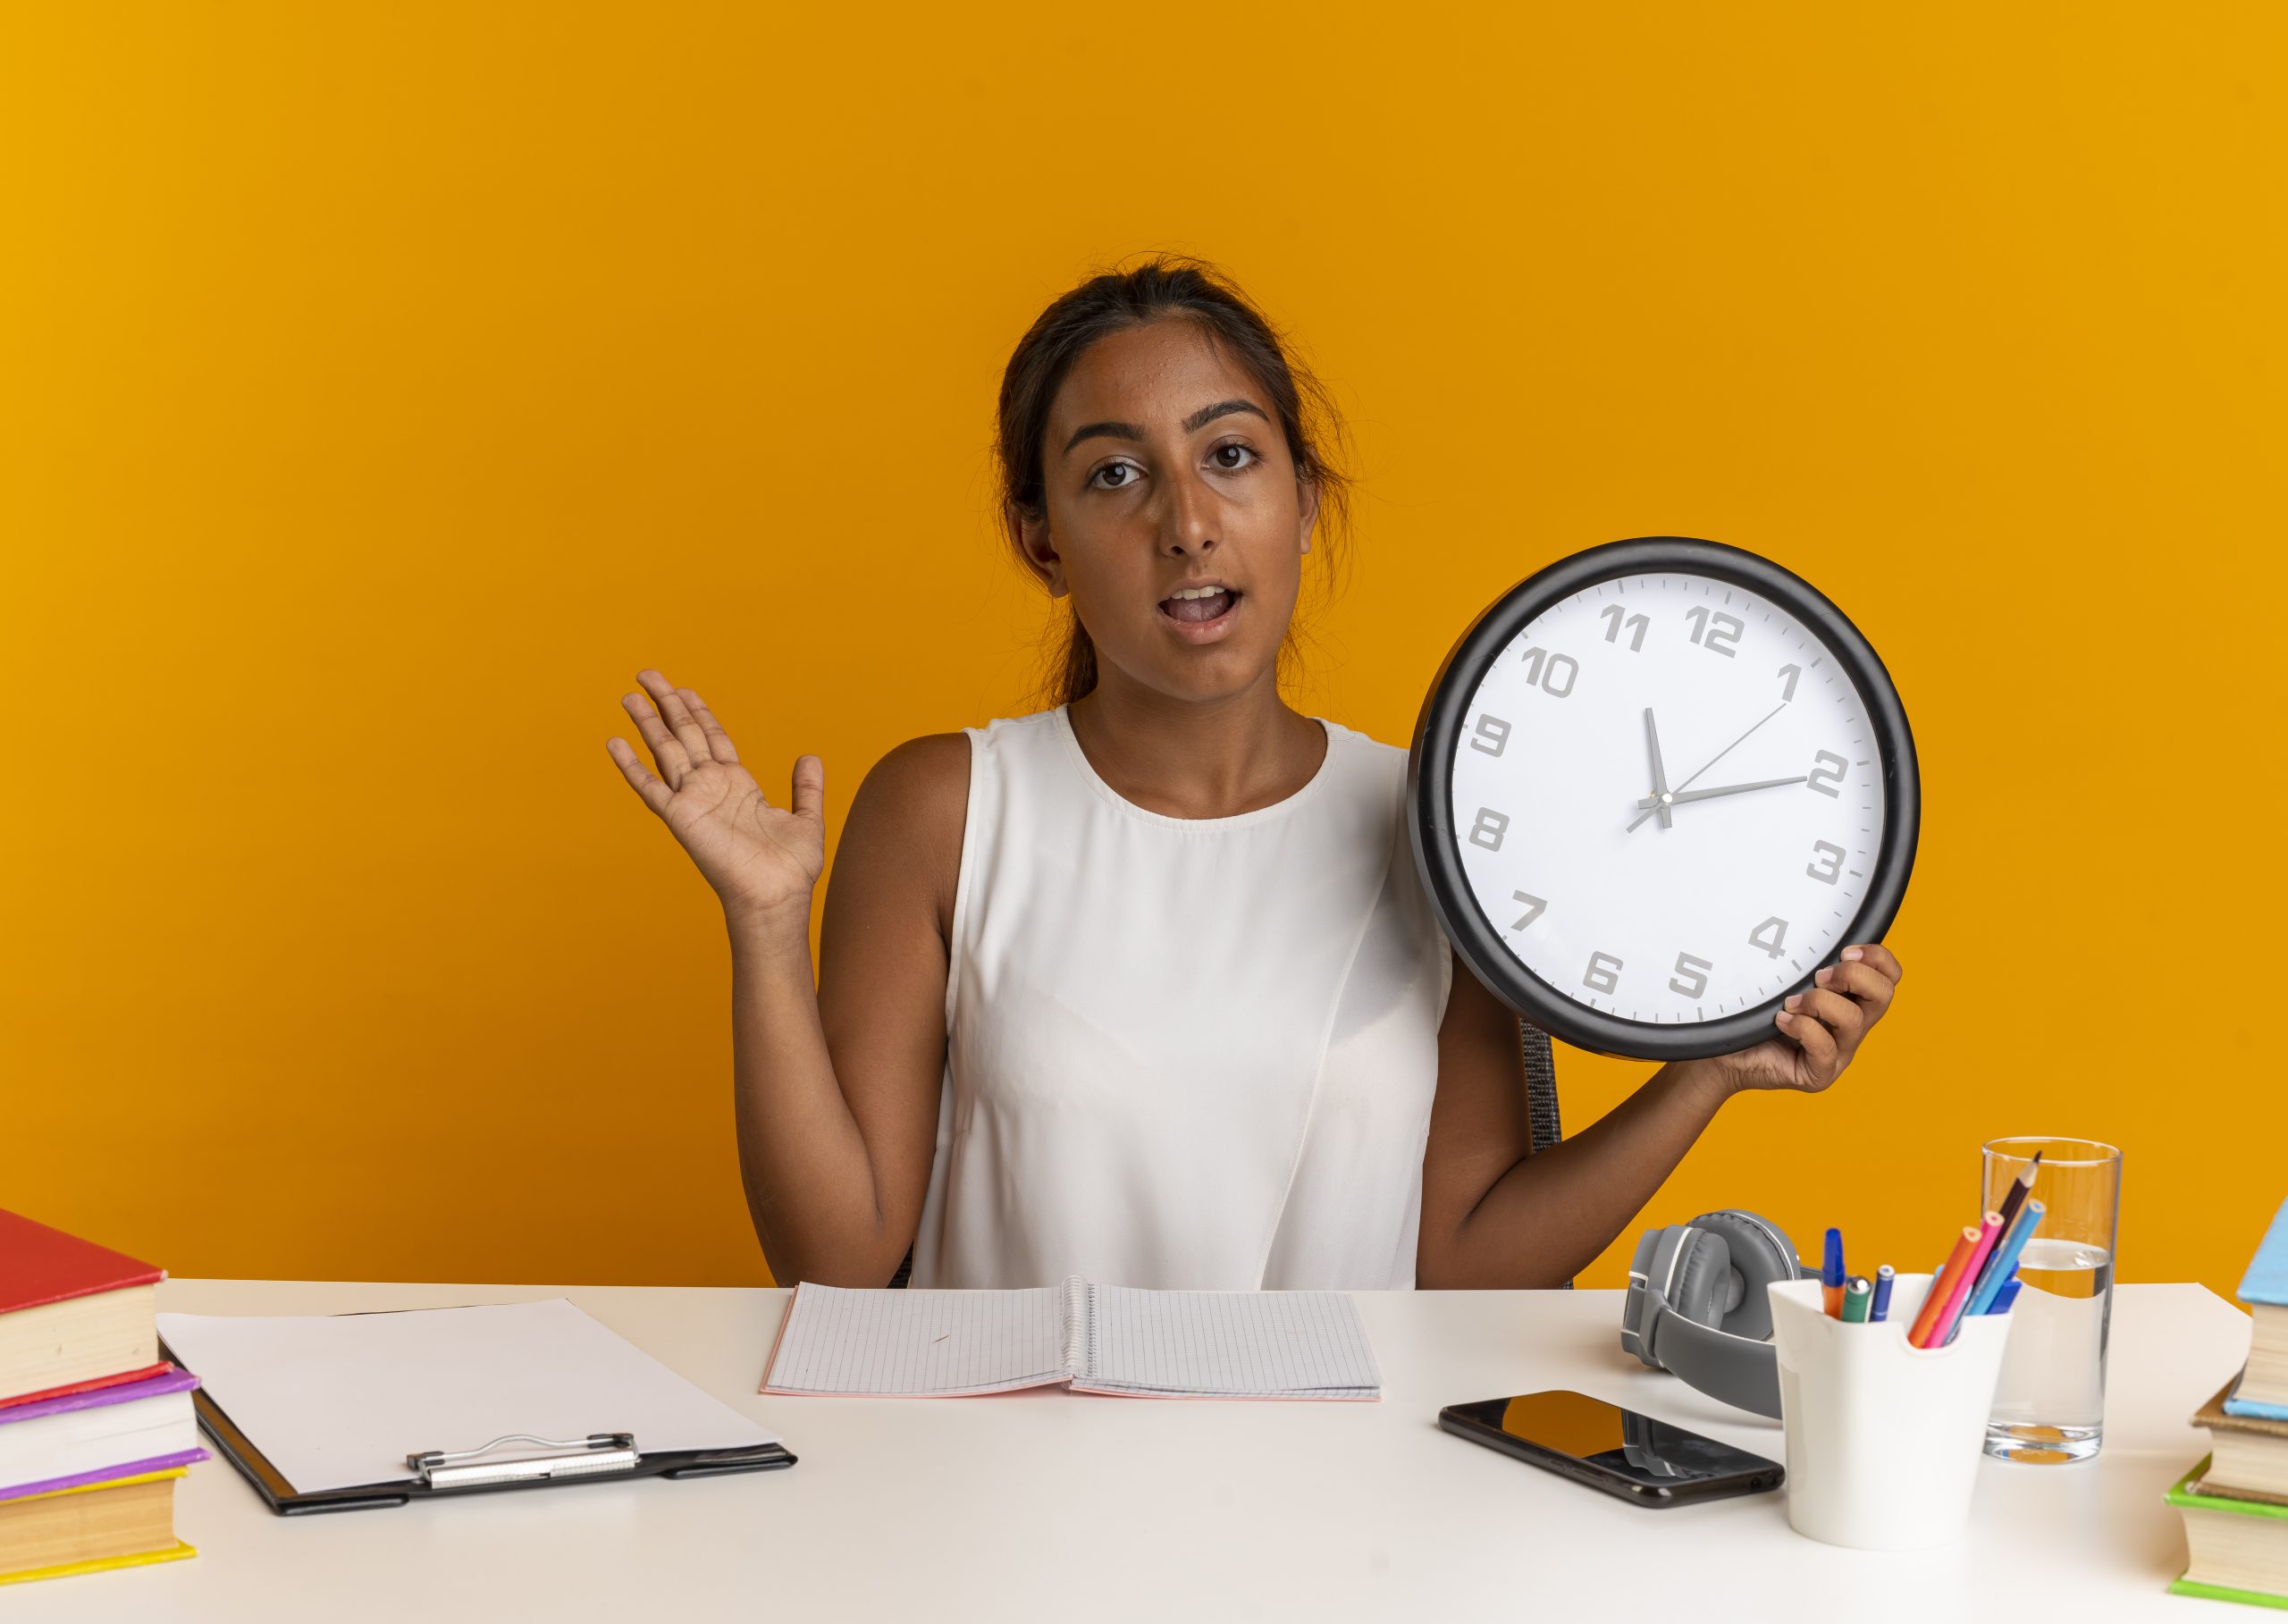 pleased-young-schoolgirl-sitting-desk-with-school-tools-holding-wall-clock-spread-hand-orange-scaled.jpg